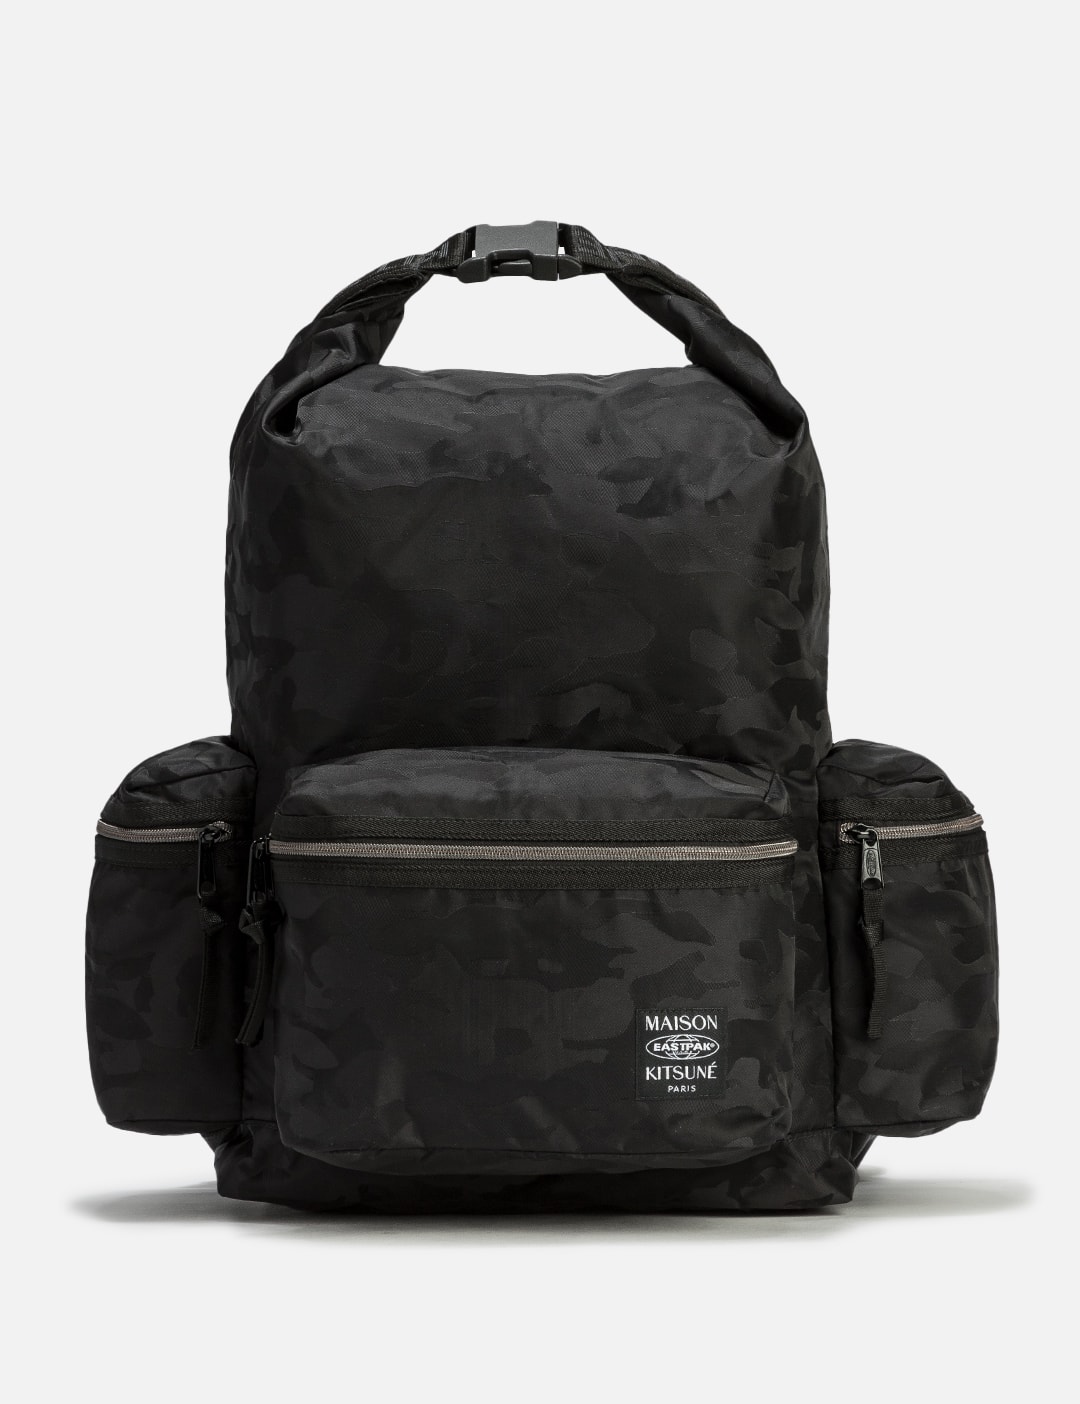 water heel veel Appartement Maison Kitsuné - Maison Kitsune x EASTPAK Toproll Backpack | HBX - Globally  Curated Fashion and Lifestyle by Hypebeast